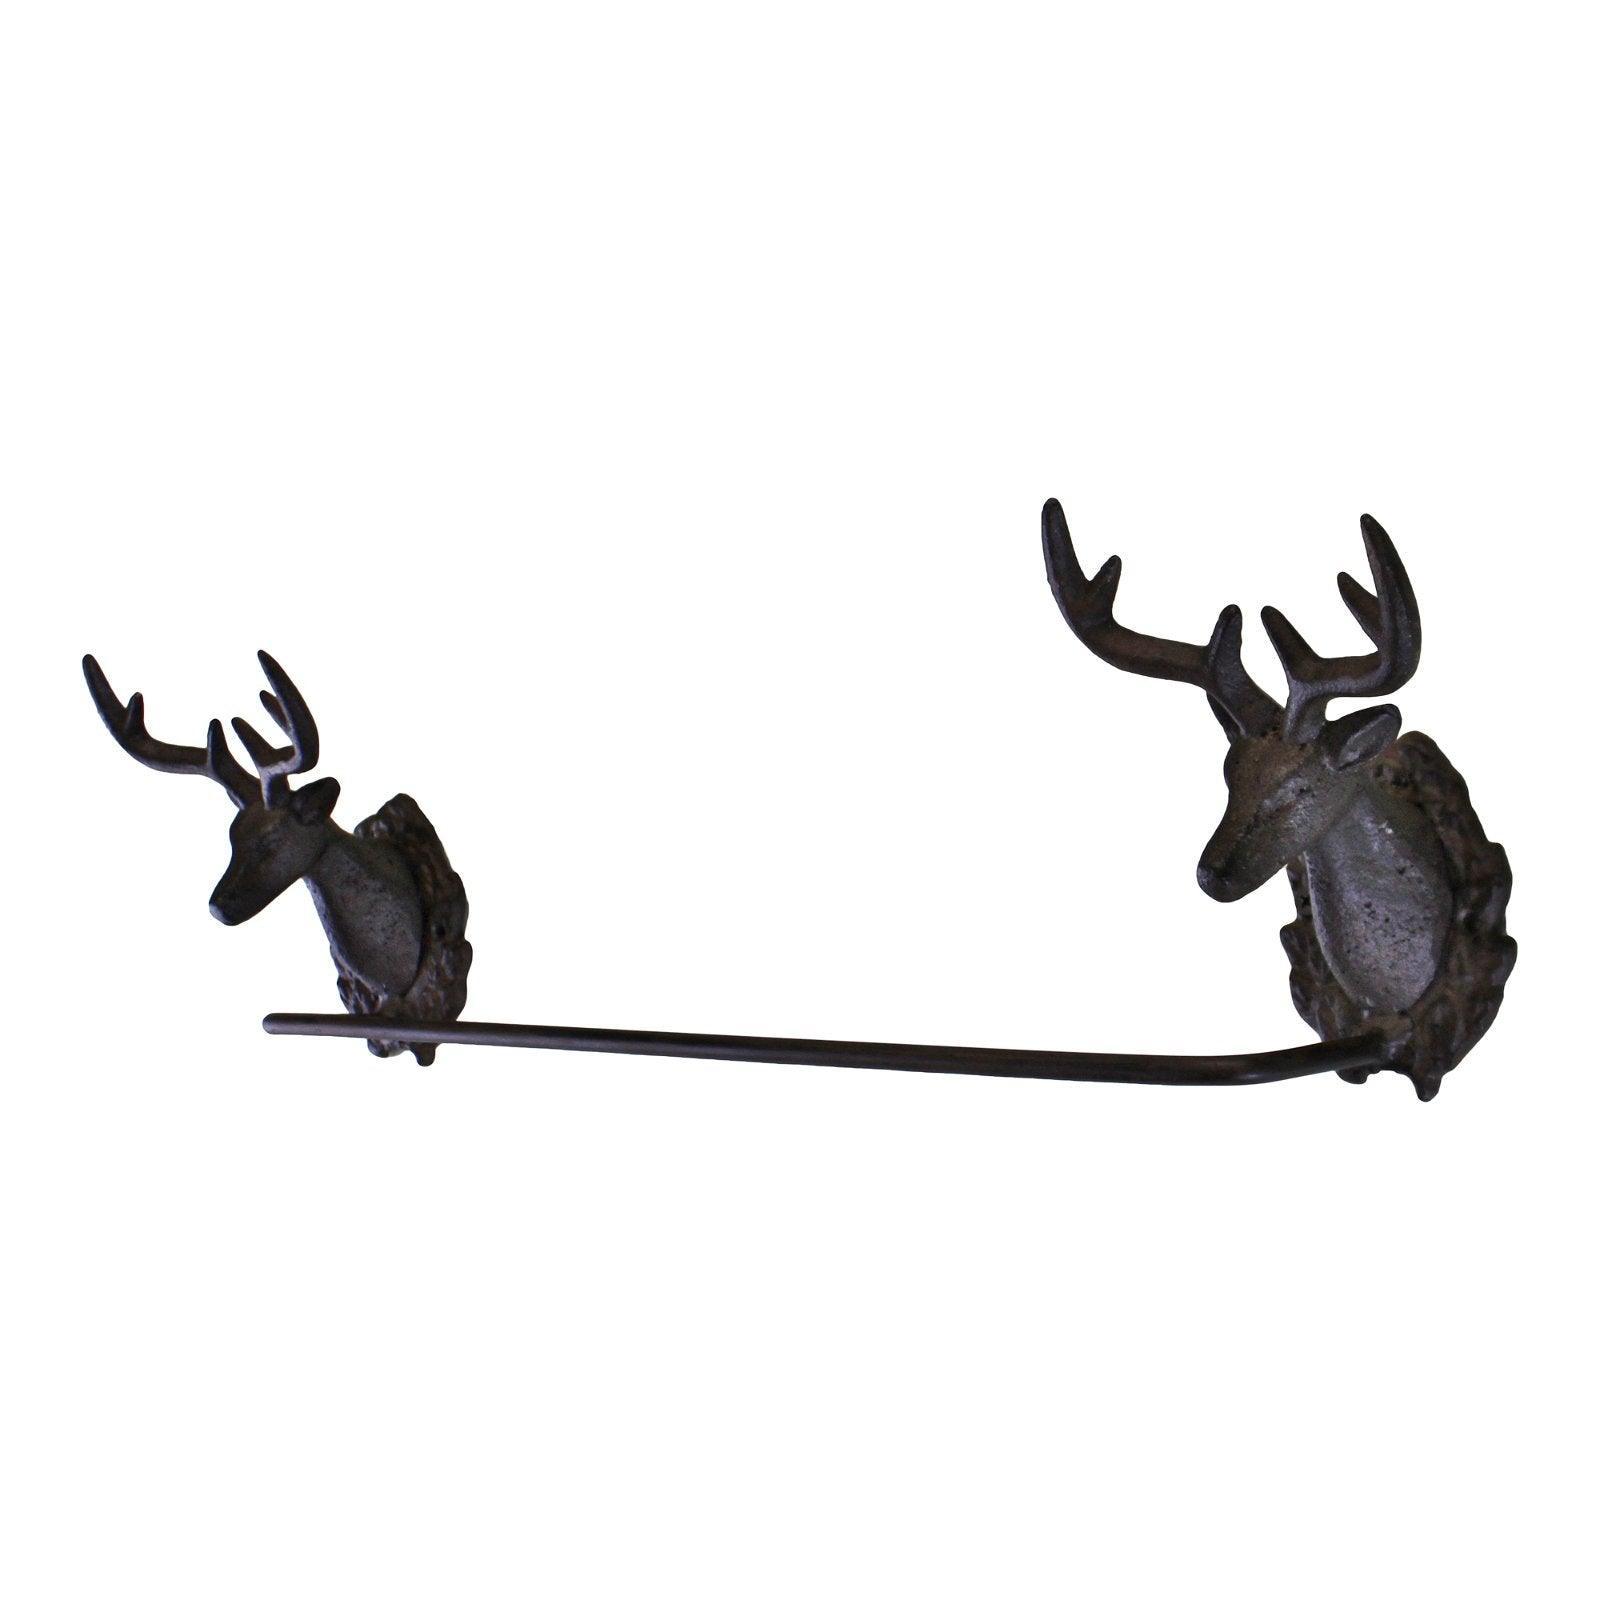 View Cast Iron Rustic Towel Rail Stag Head Design information